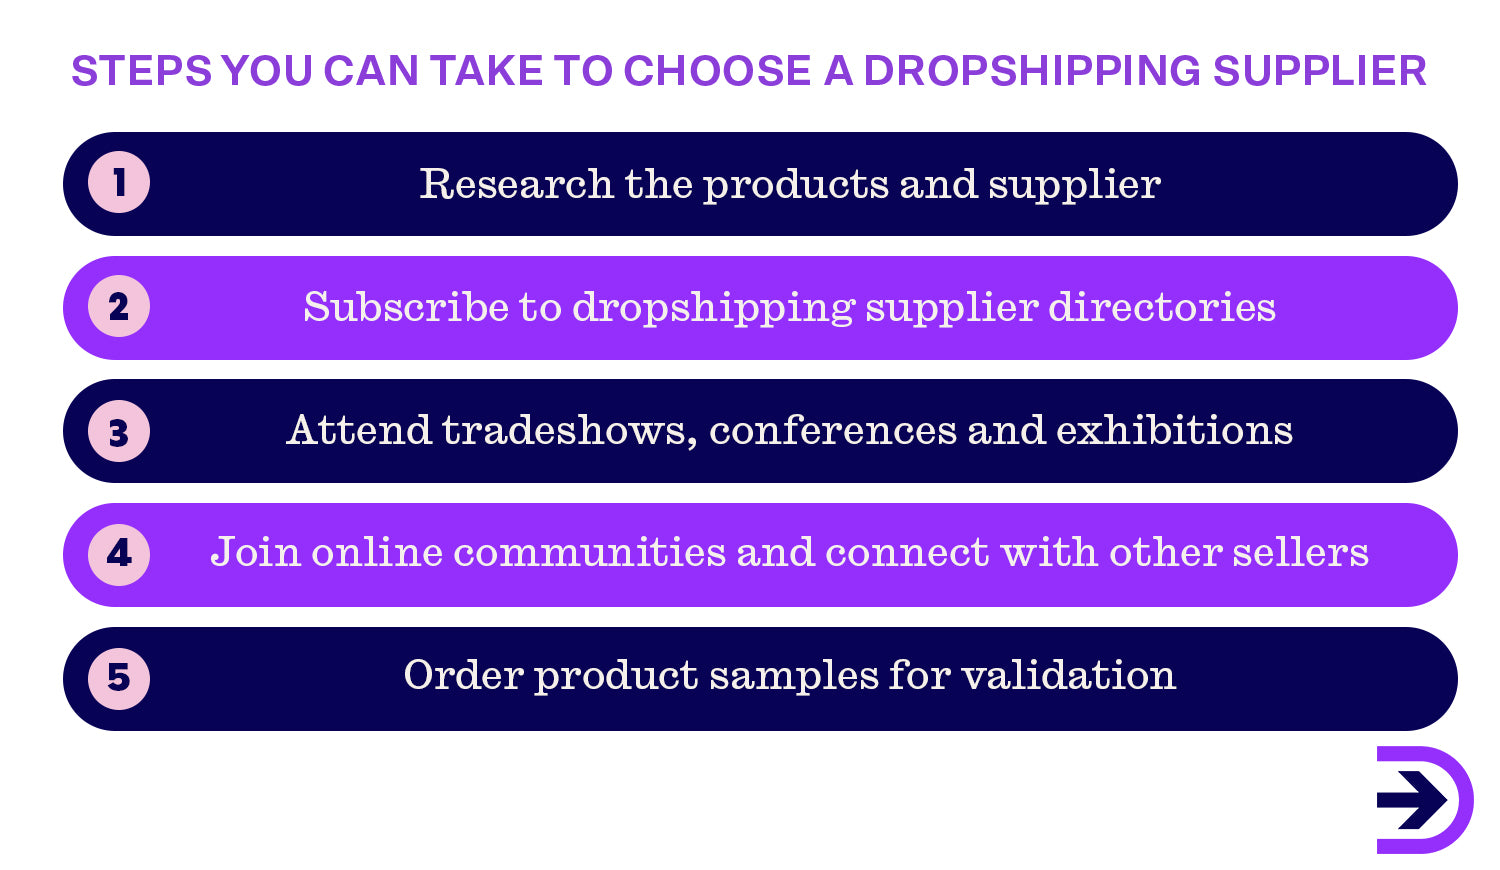 Find legitimate dropshipping suppliers by doing market research and connecting with dropshipping communities.